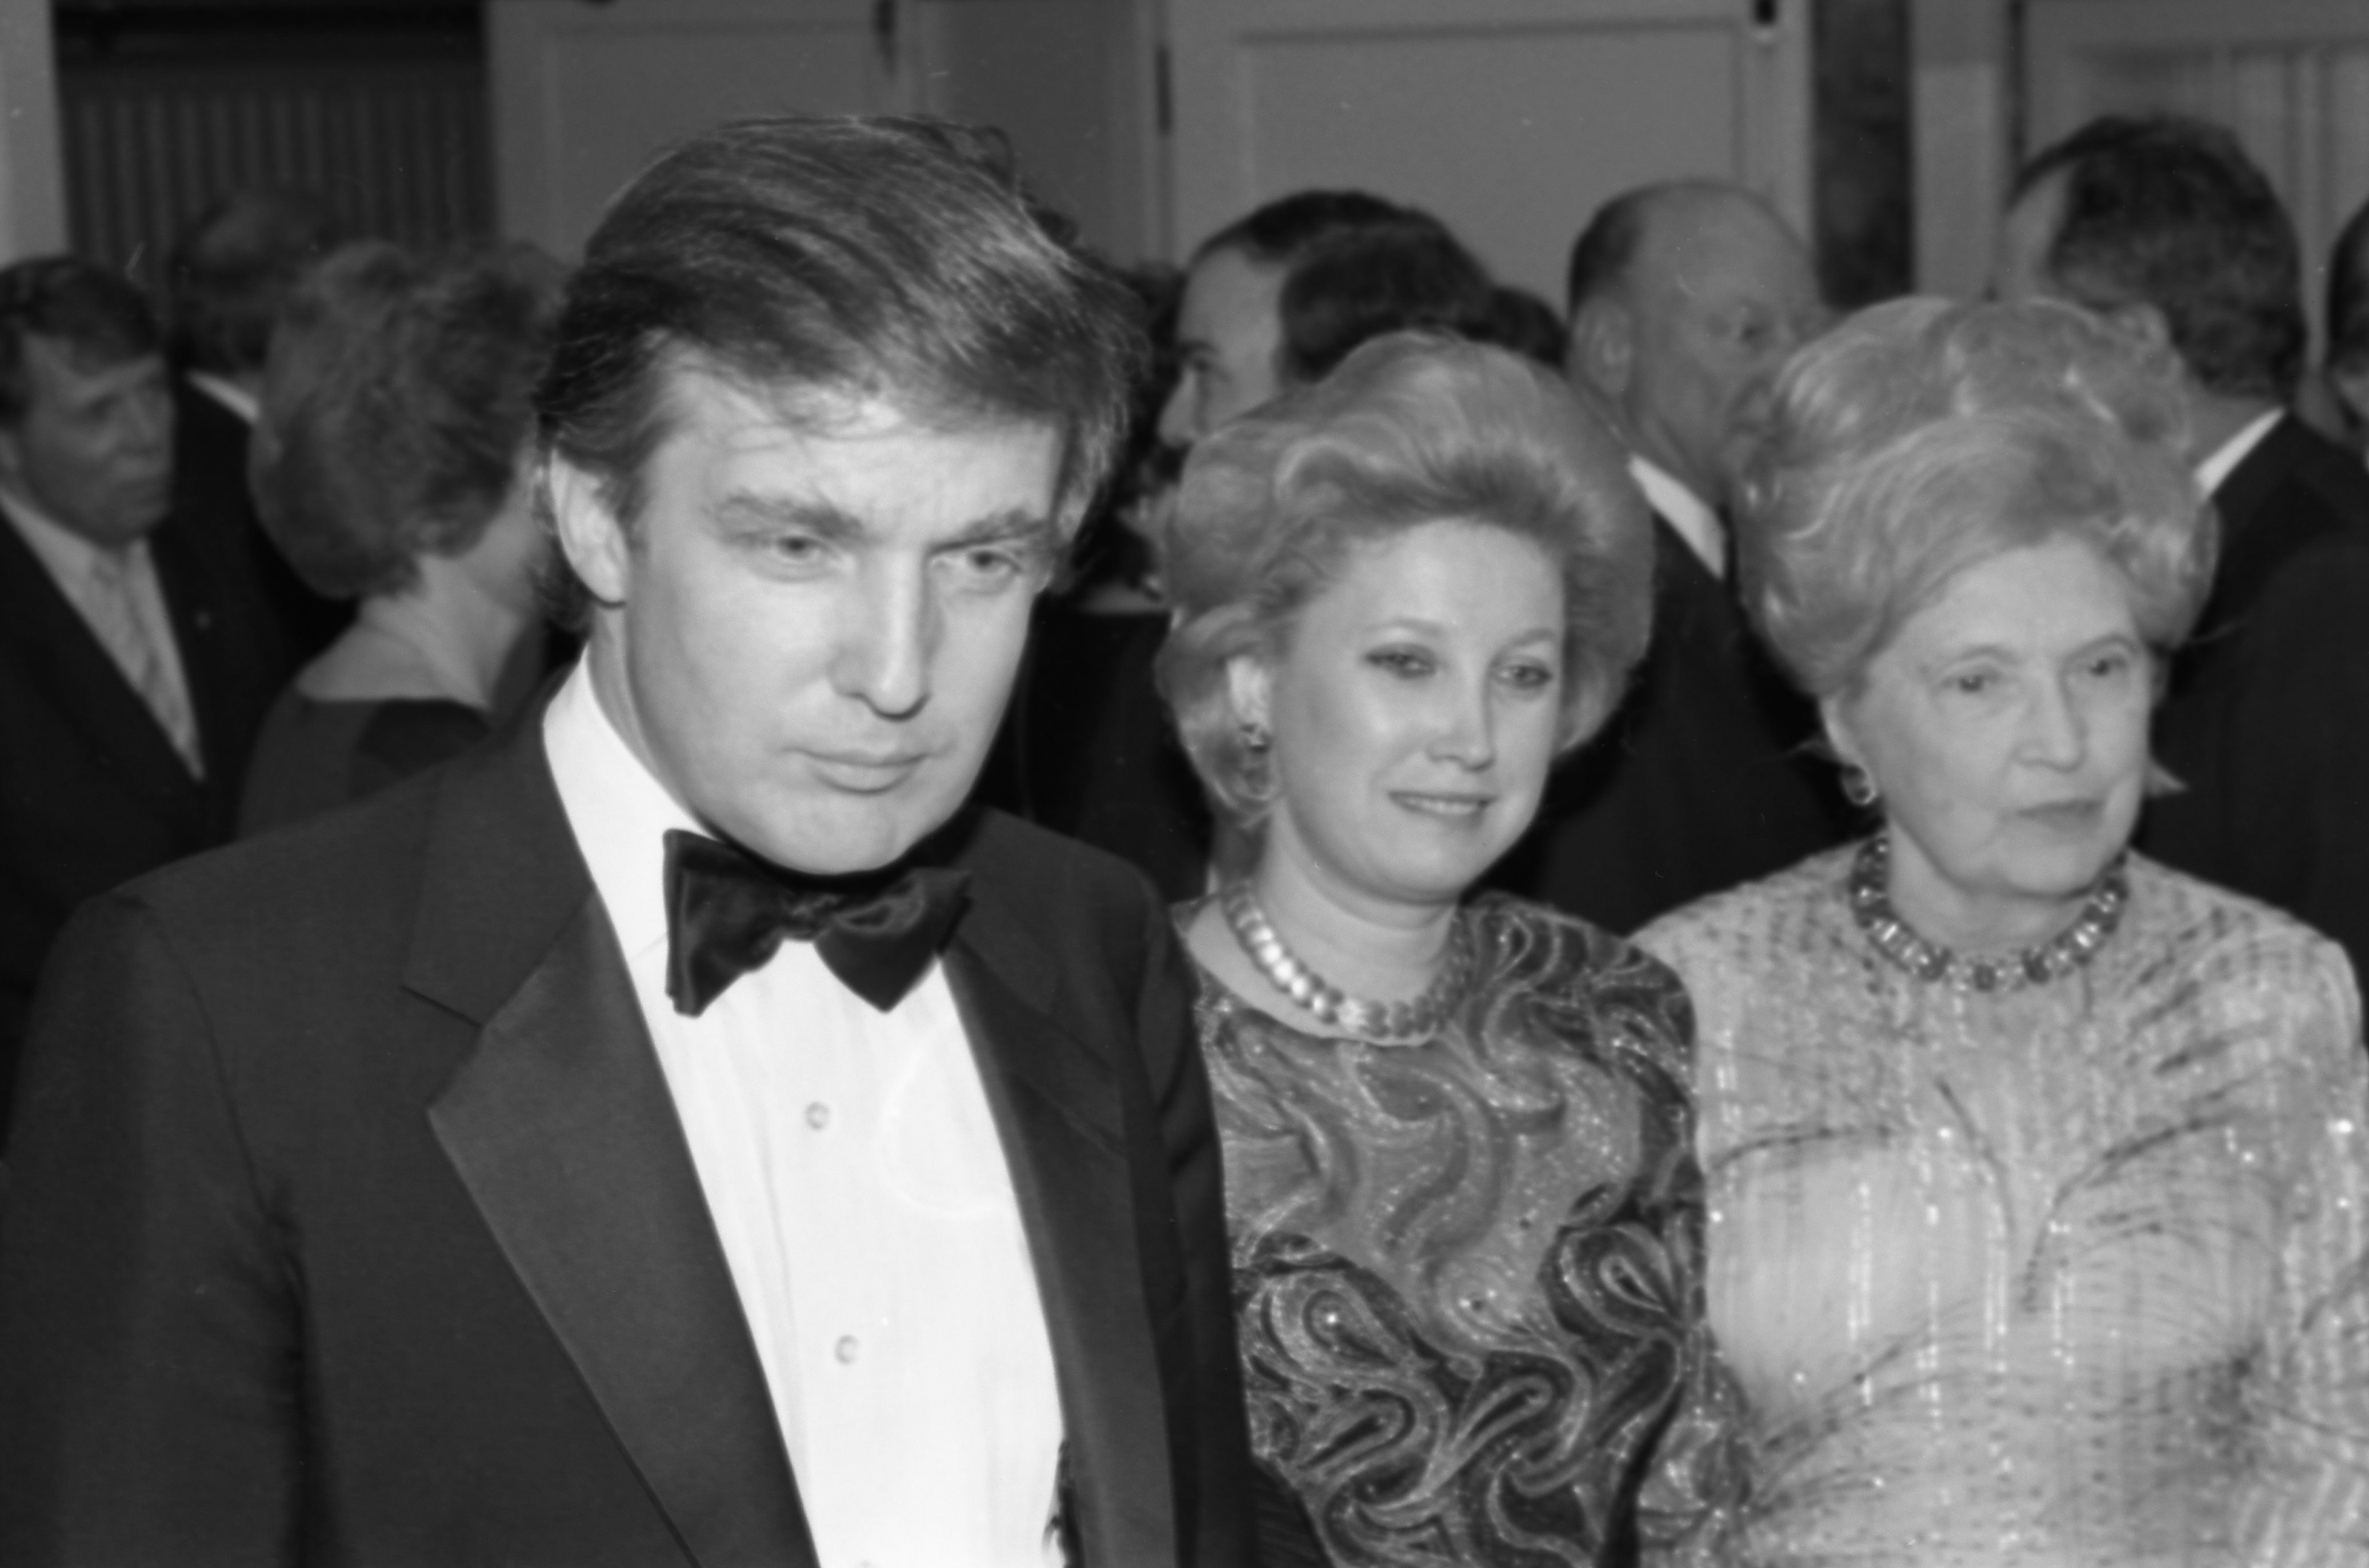 Donald Trump, his sister Maryanne Trump Barry and his mother Mary Anne MacLeod Trump attend the 90th birrthday celebration of Dr. Norman Vincent Peale author of the book "The Power of Positive Thinking" at the Waldorf Astoria Hotel in May 1988 in New York, New York | Source: Getty Images